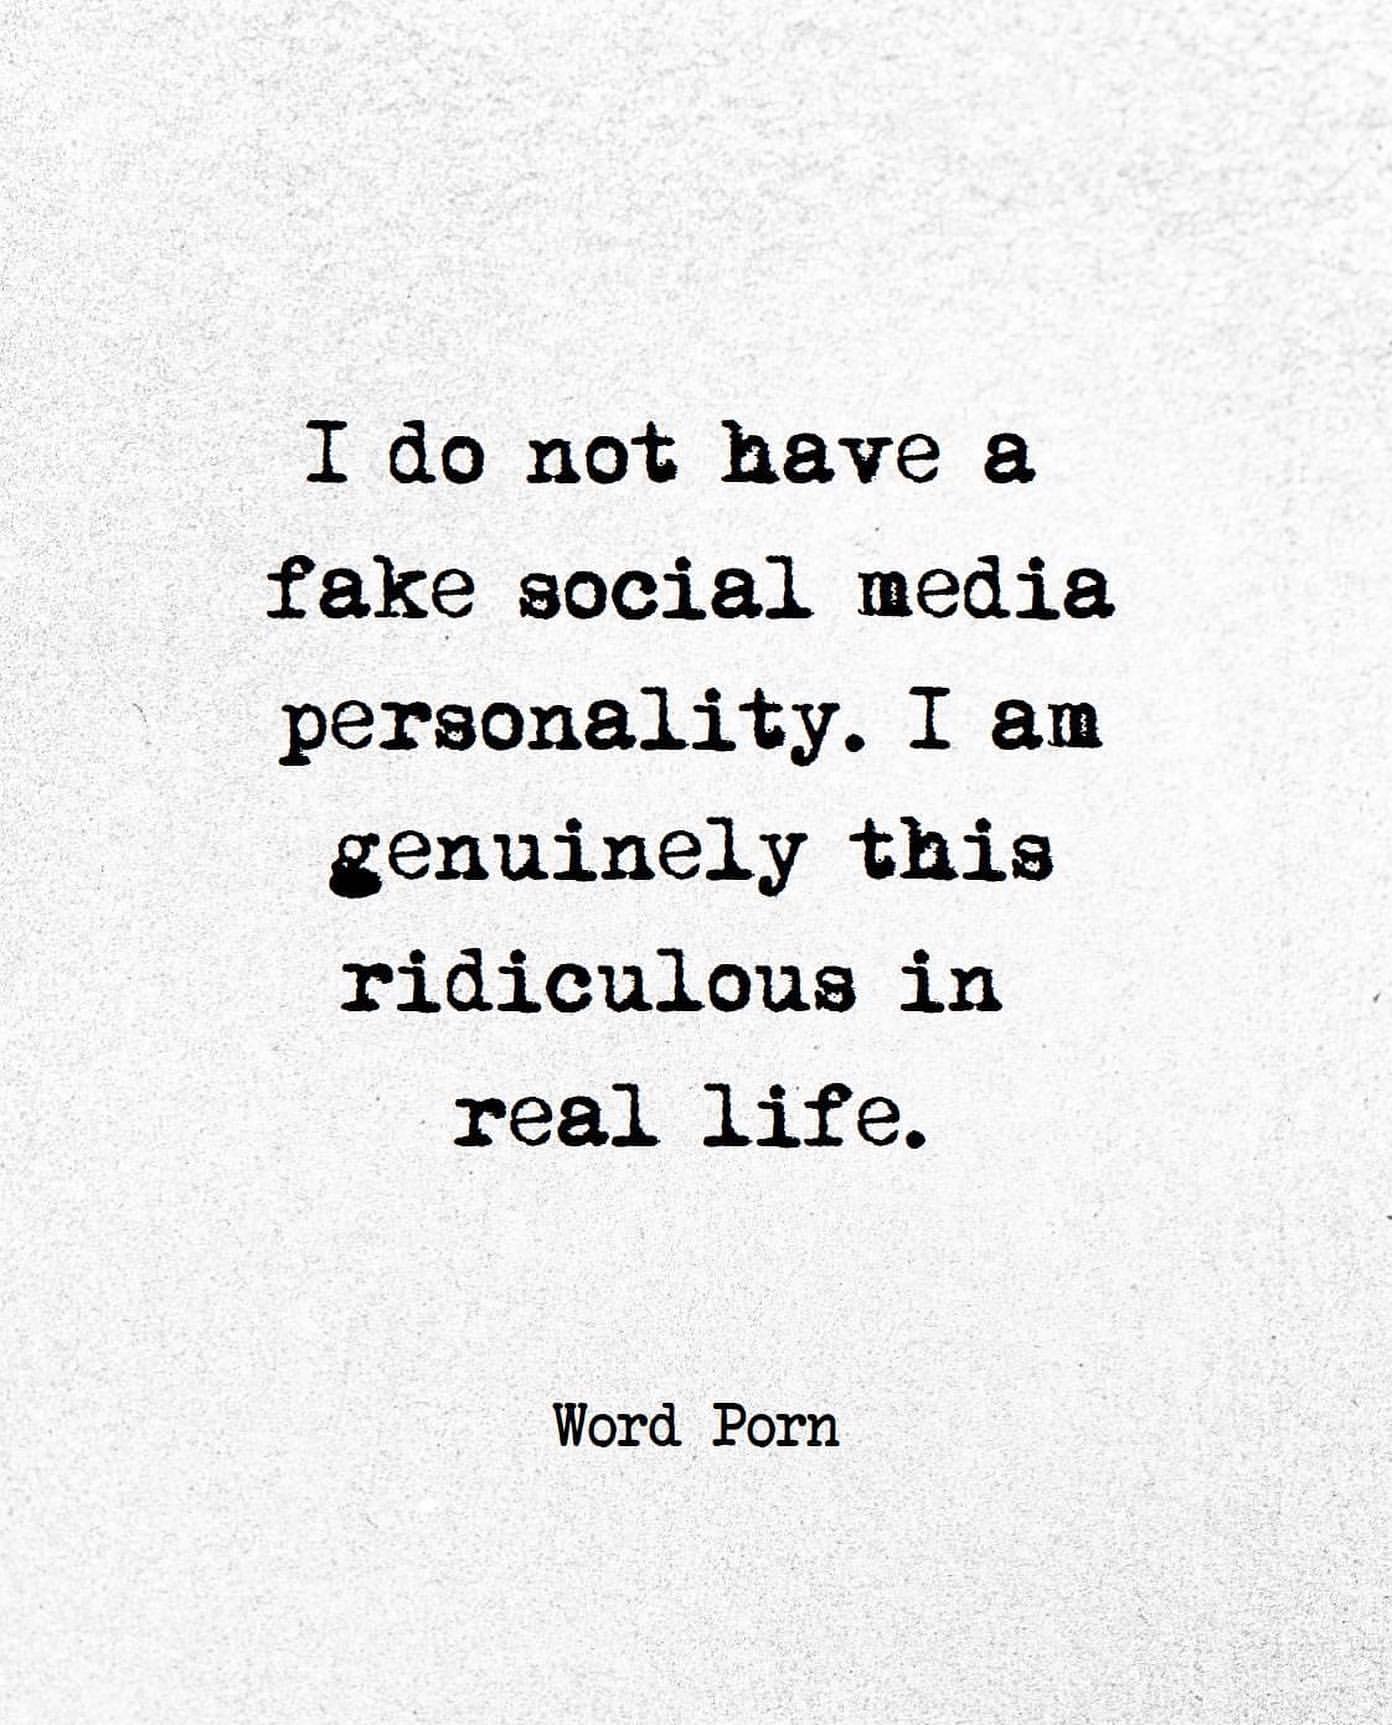 I do not have a fake social media personality. I am genuinely this ridiculous in real life.